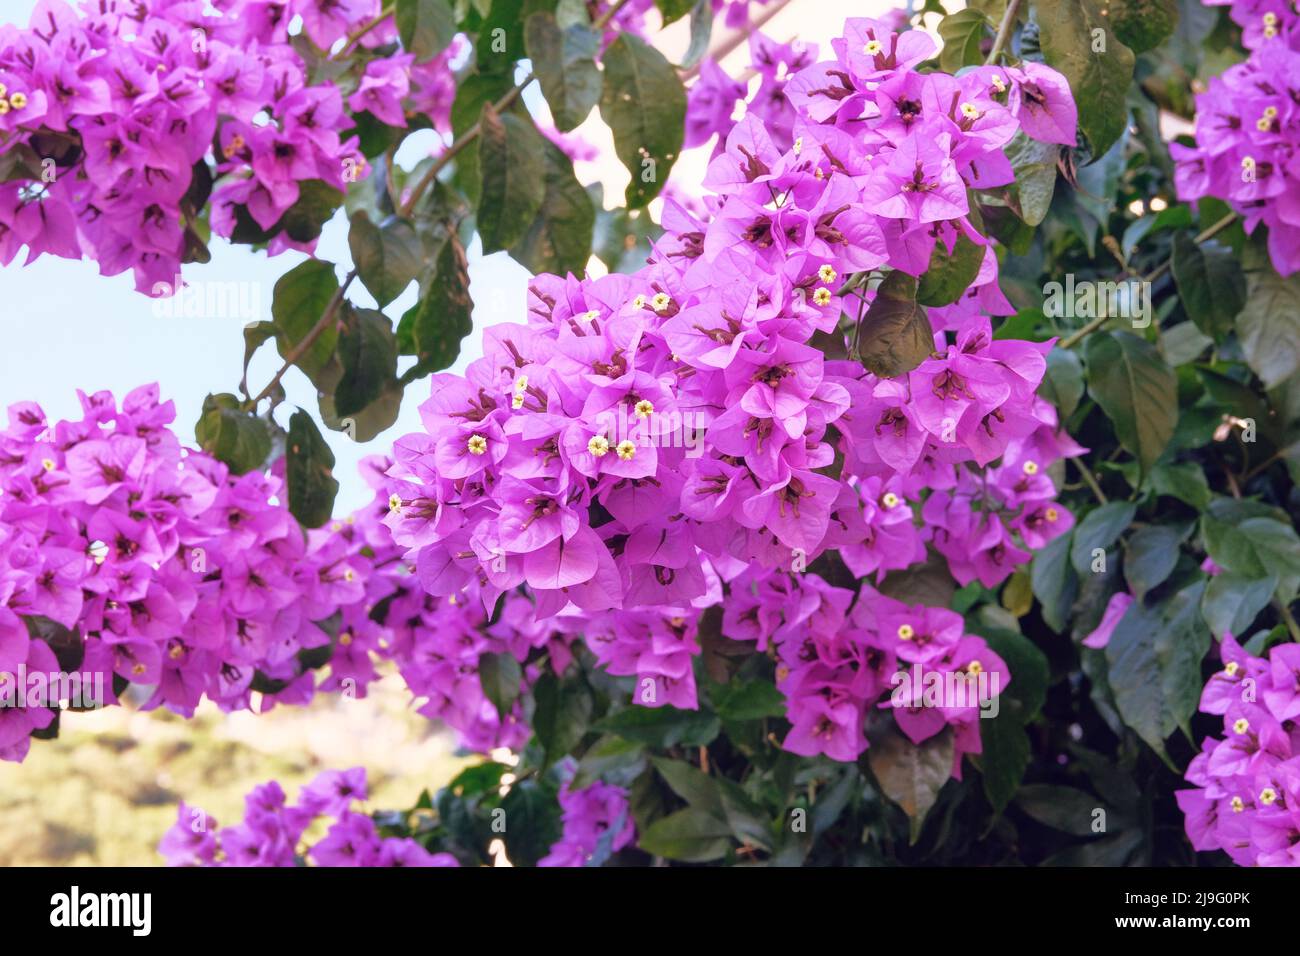 Bougainvillea bush grows next to residential buildings on the coast of Croatia. Summer landscapes in journey, violet blooming flowers. Stock Photo